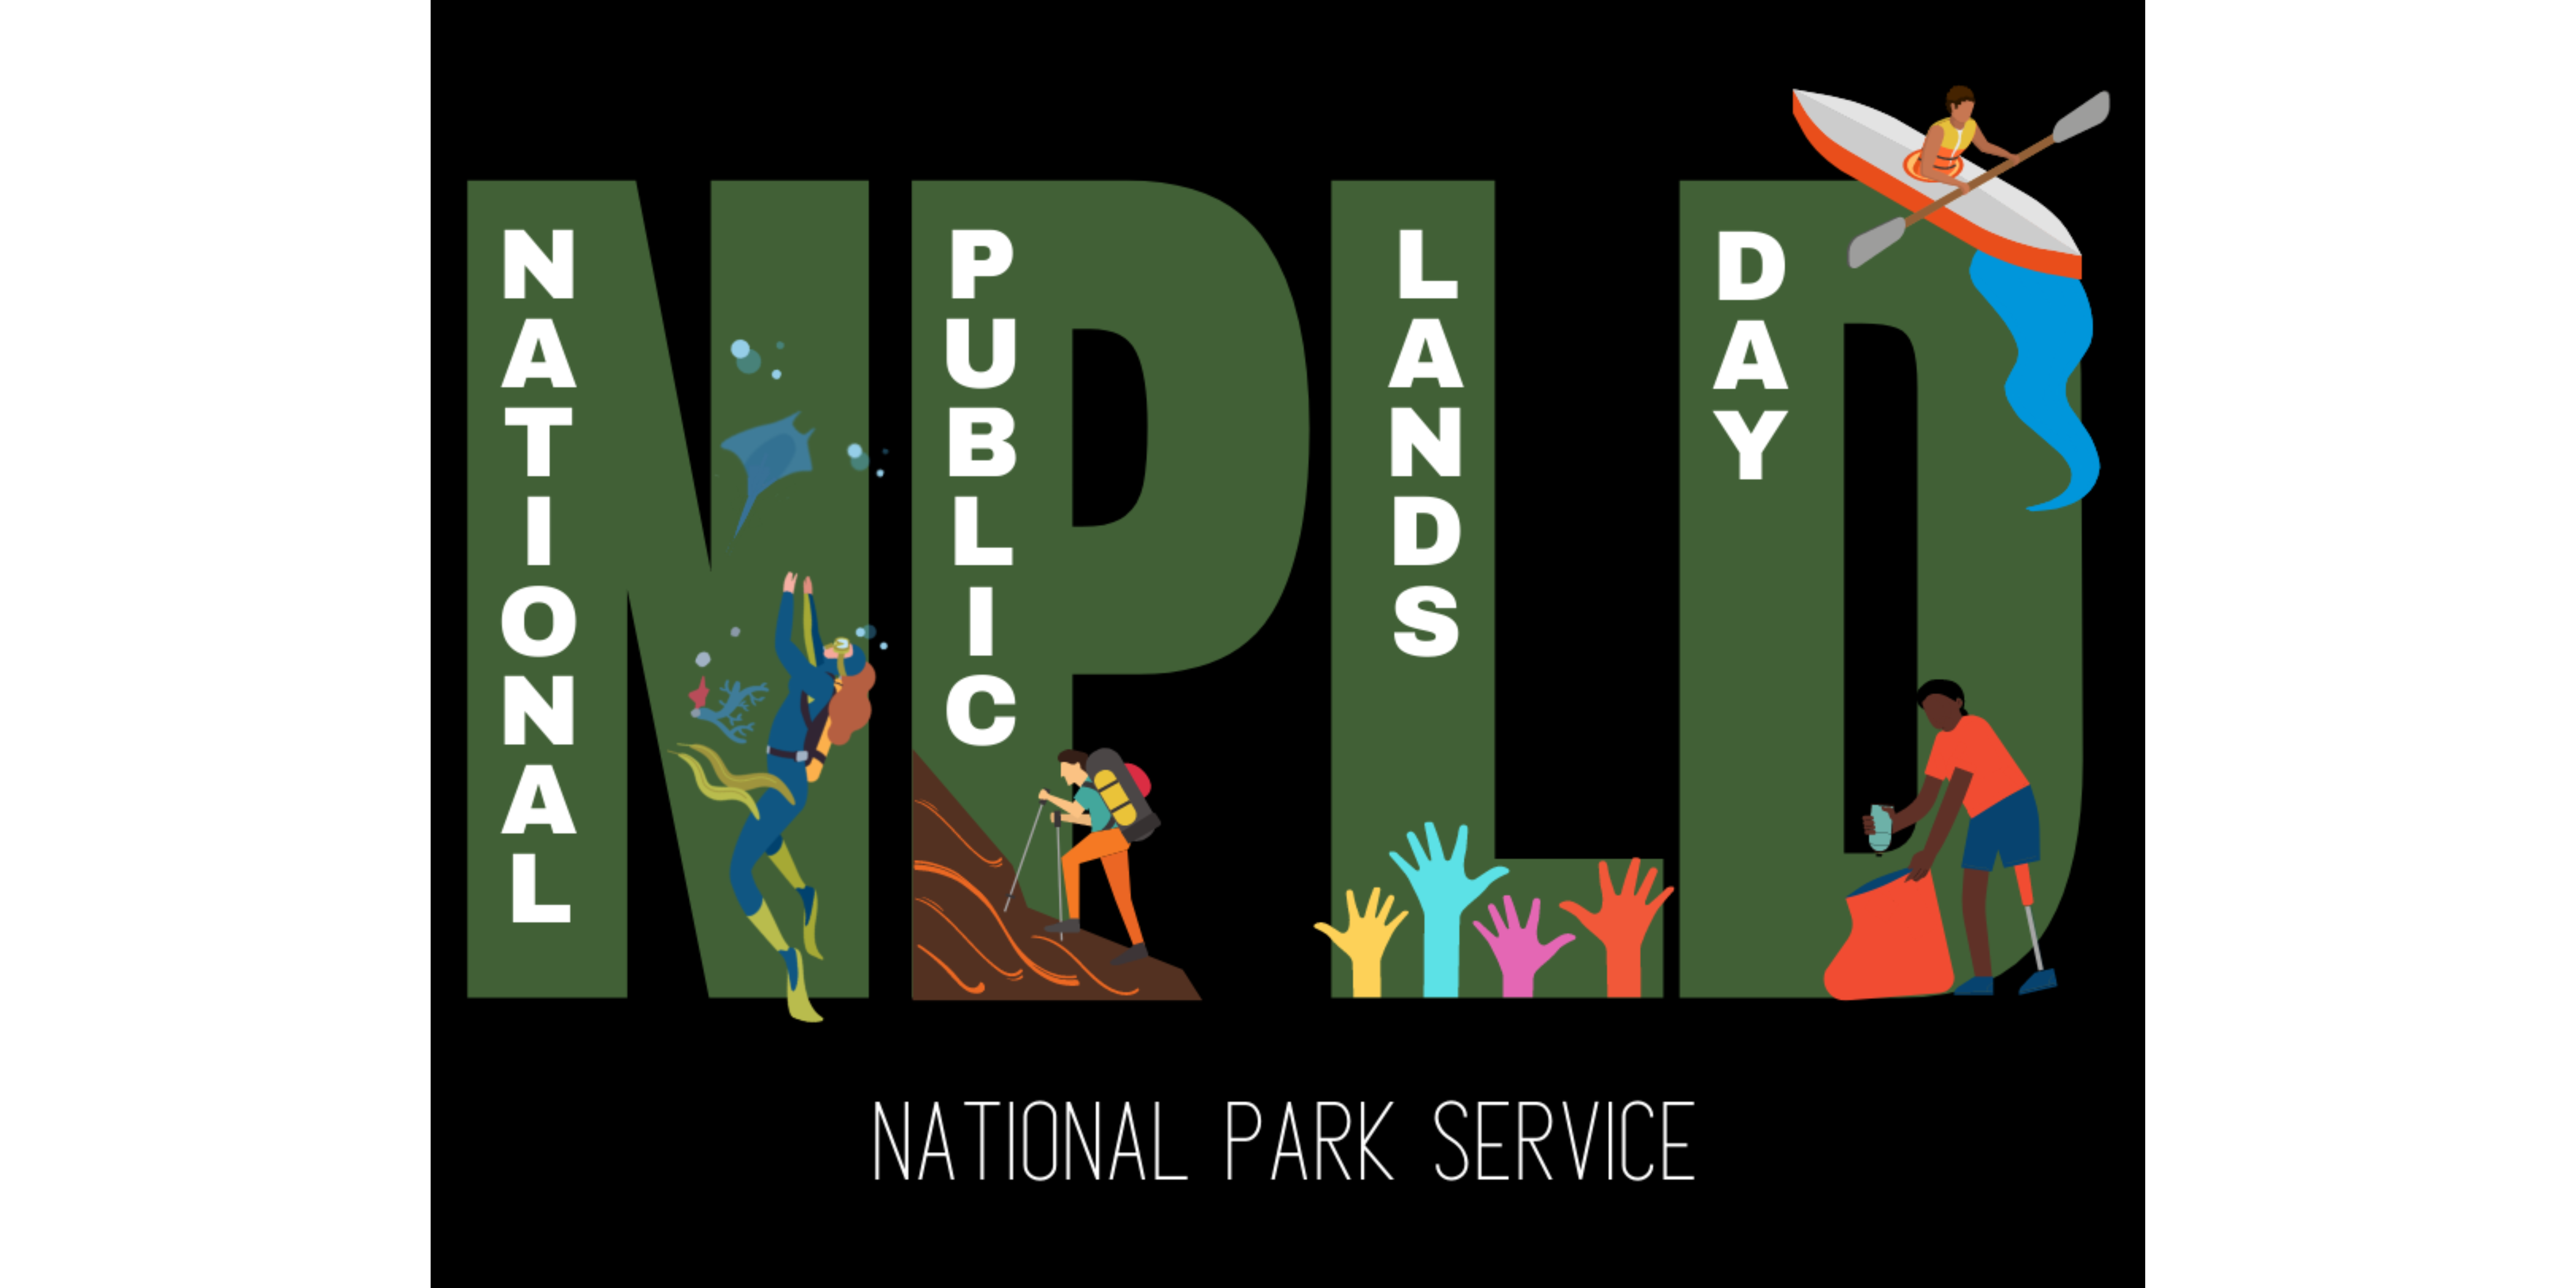 An infographic with photos of the word NPLD and inside each word has the words National Public Lands Day written inside each individual word. At the bottom in white text is National Park Service.